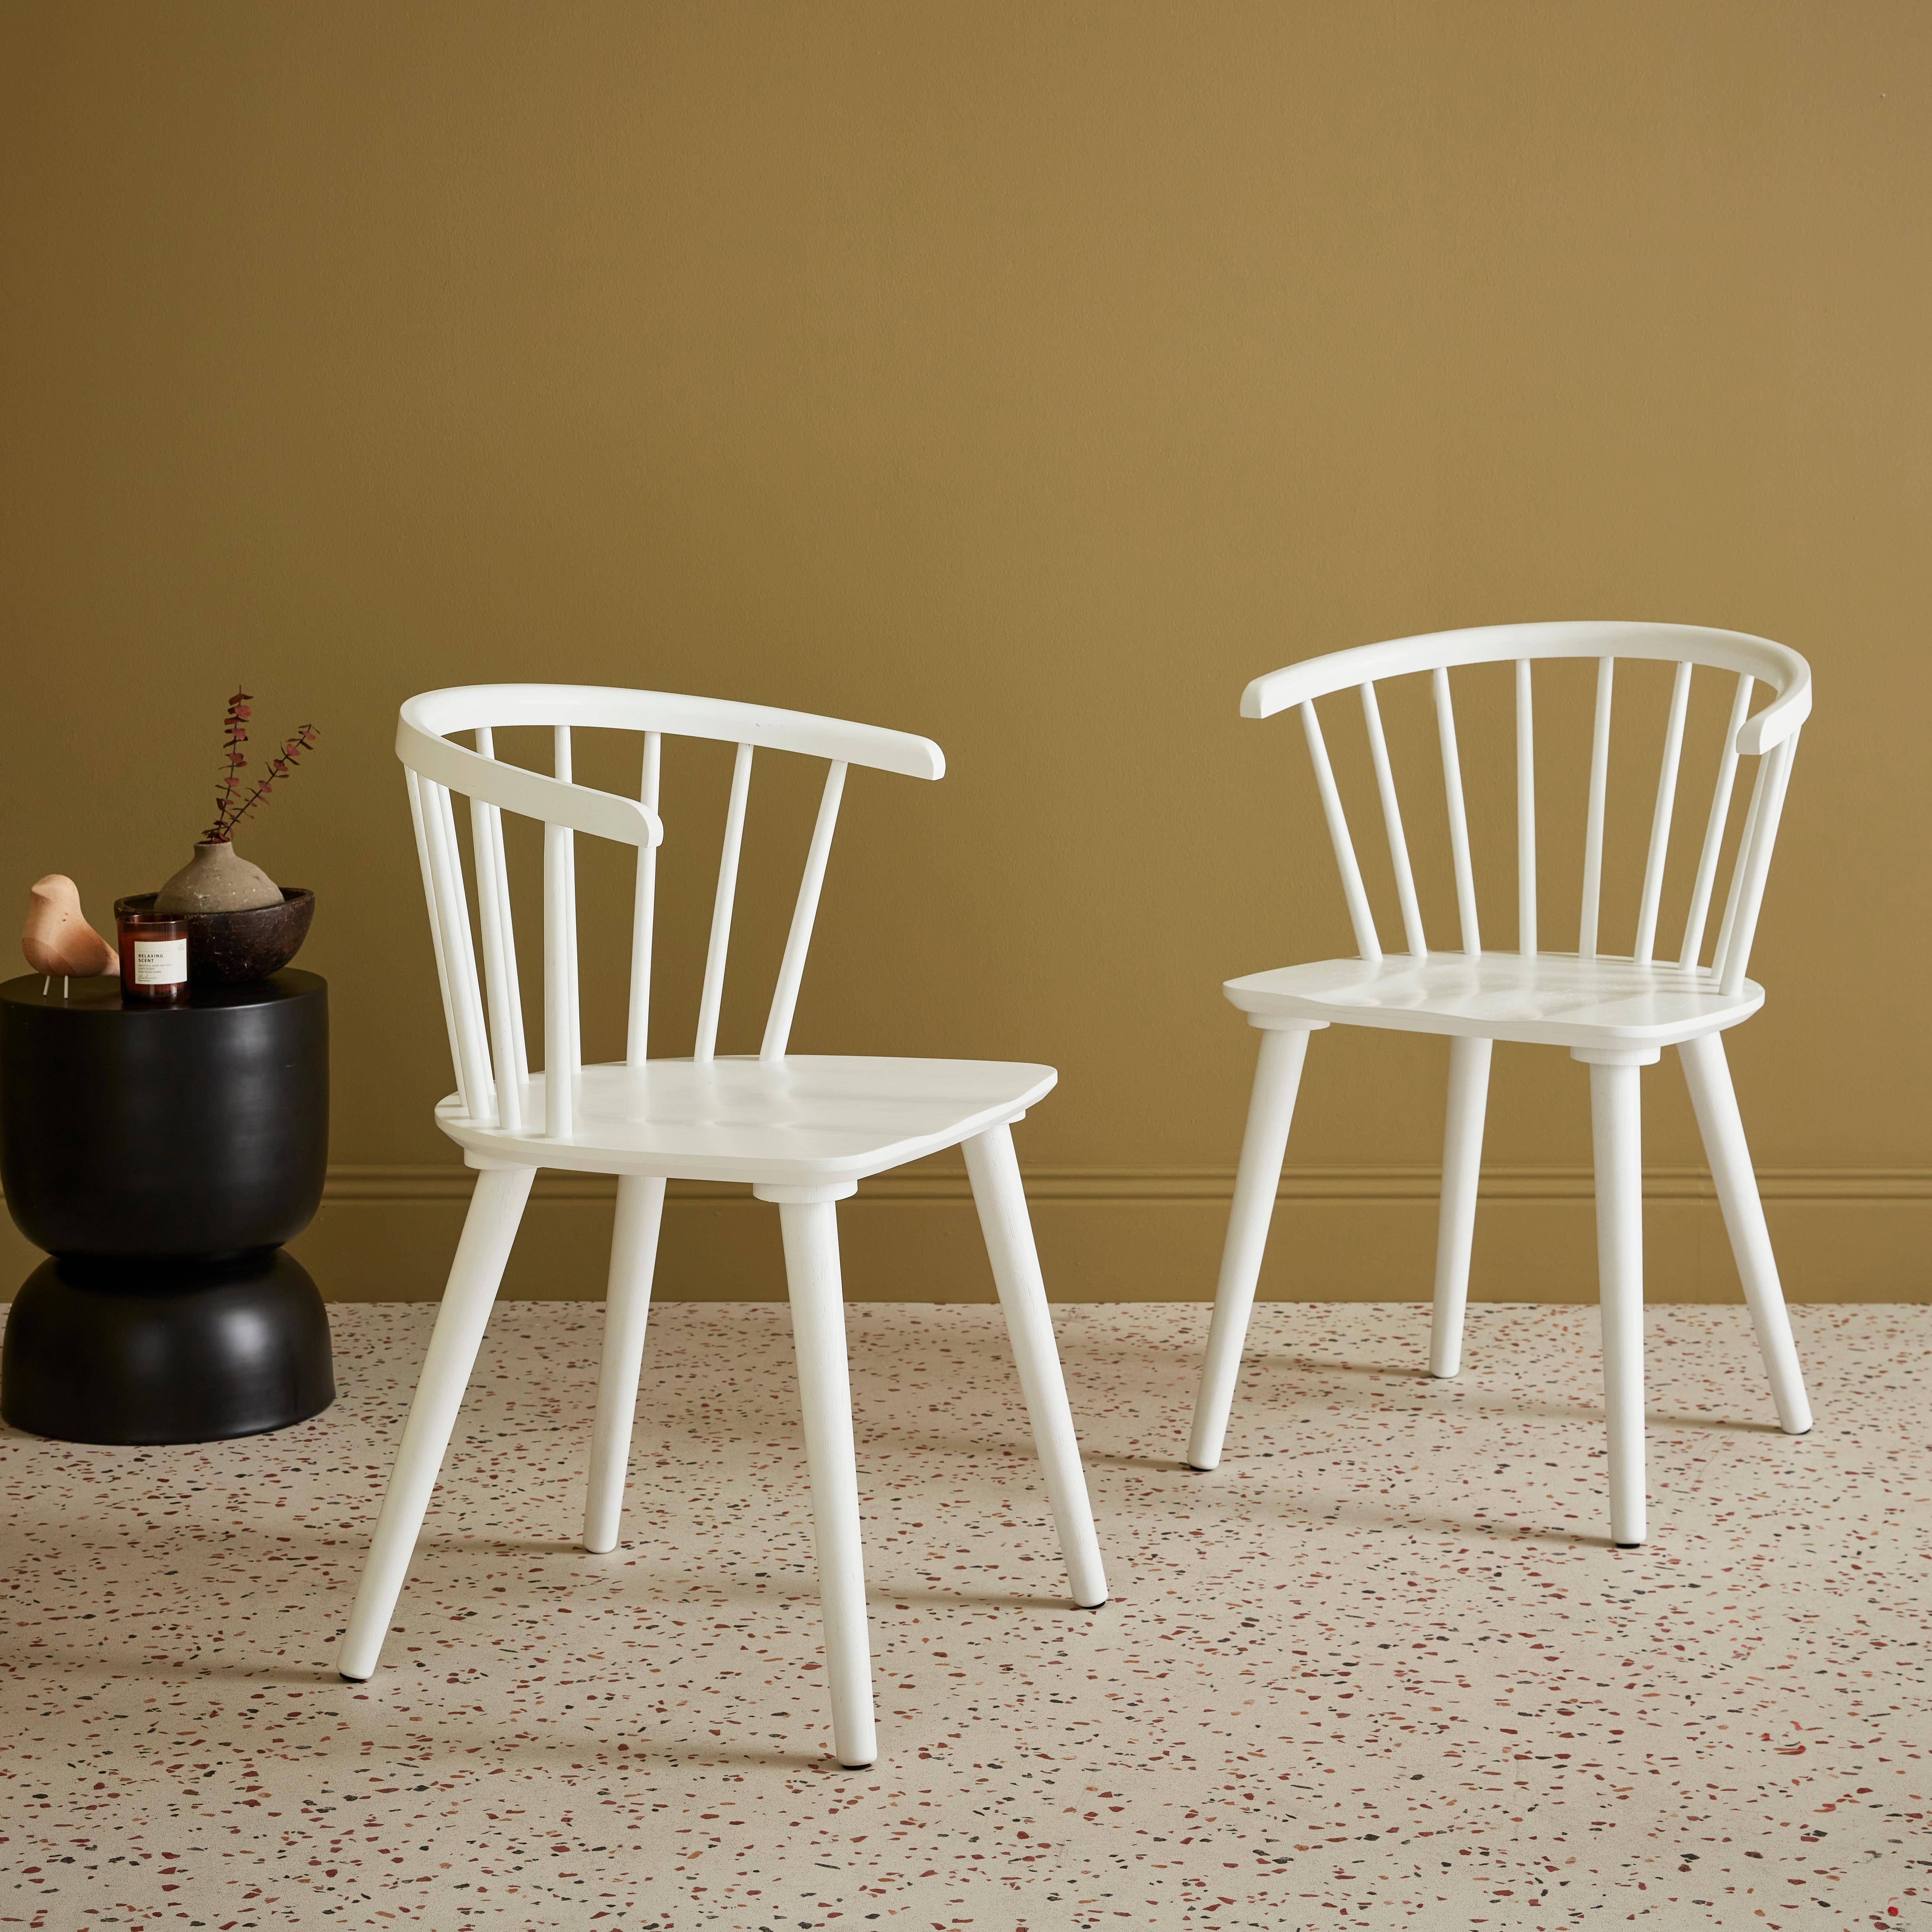 Pair of Wood and Plywood Spindle Chairs, white, L53 x W47.5 x H76cm Photo1